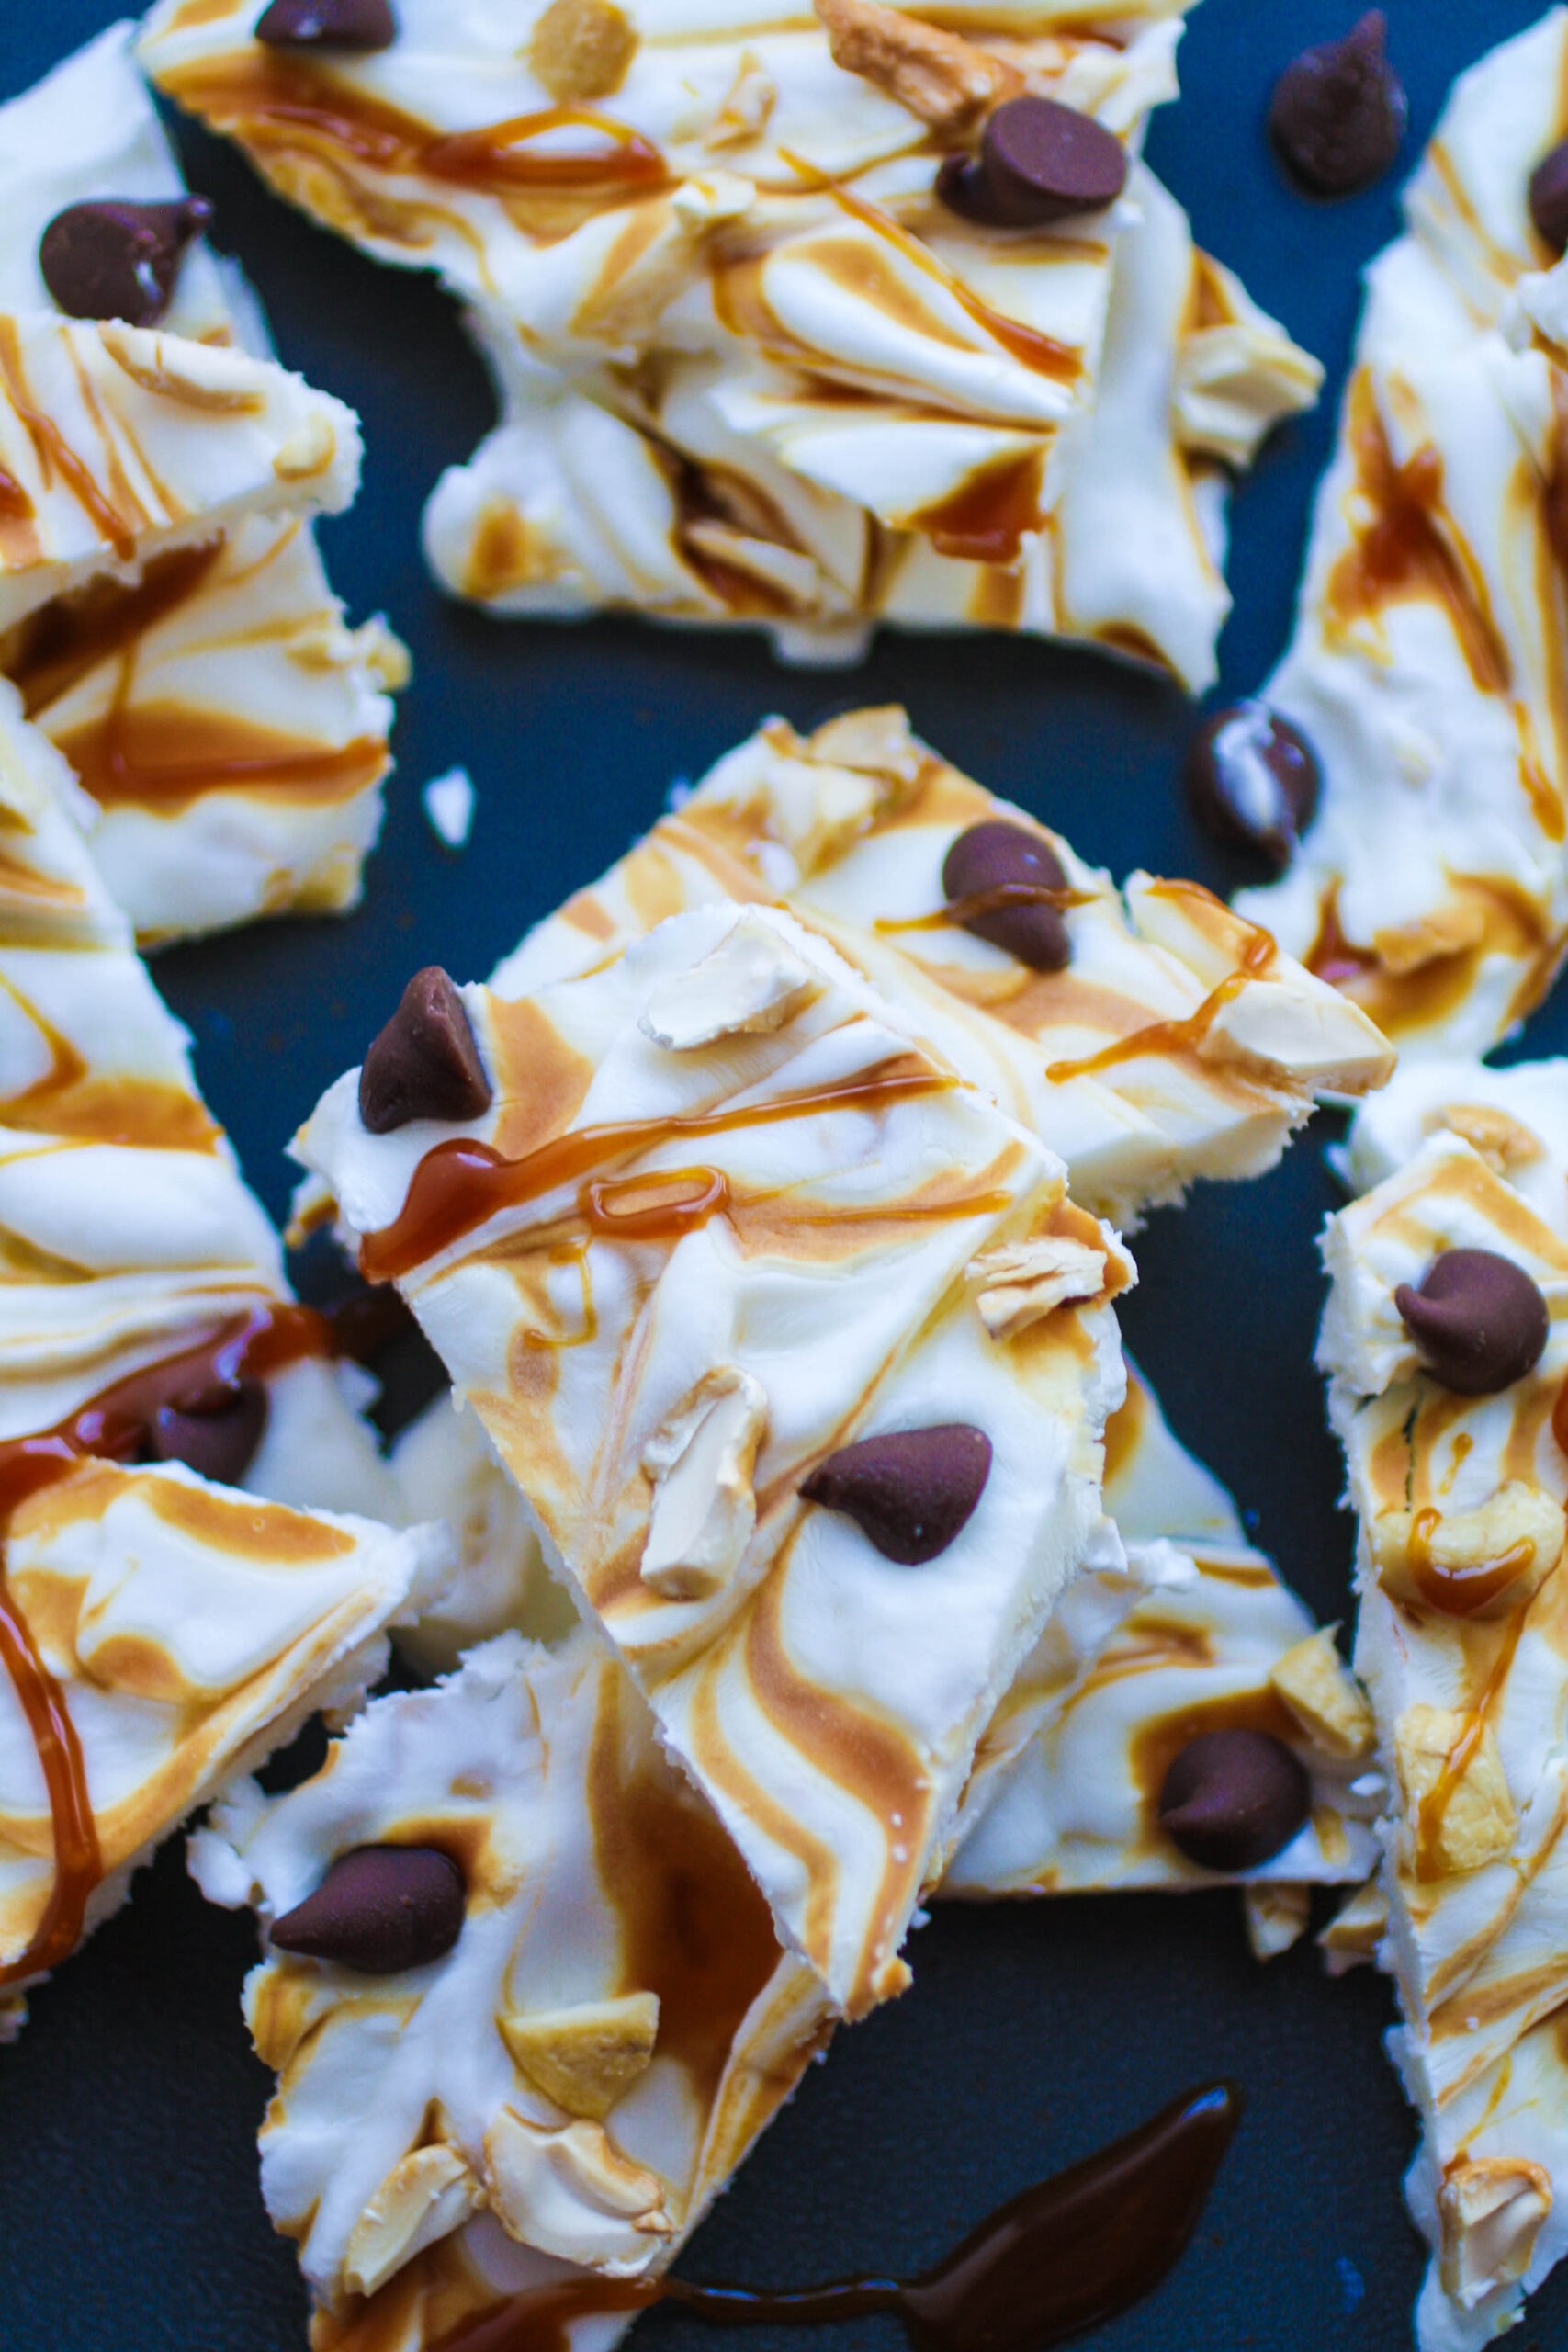 Grab a piece or two of Frozen Yogurt Bark with Caramel, Cashews and Chocolate before they're gone! You'll love this frozen treat.